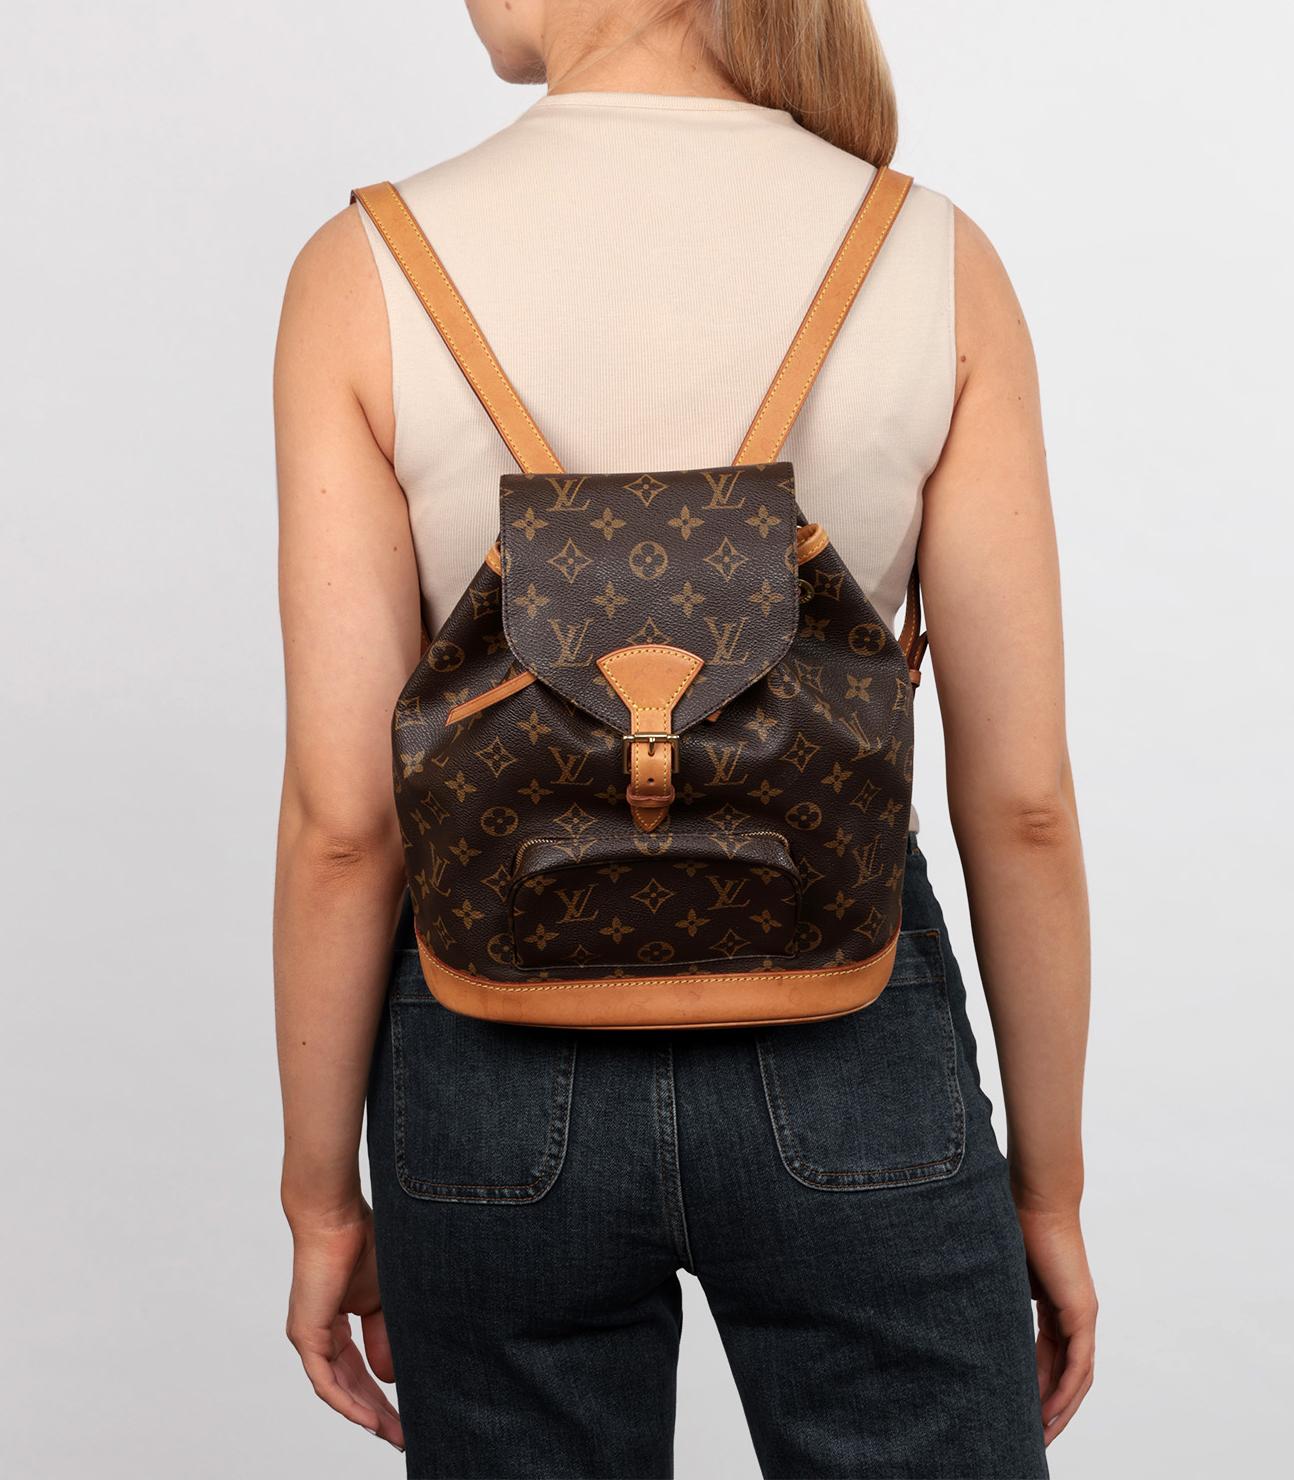 Louis Vuitton Brown Monogram Coated Canvas & Vachetta Leather Montsouris Backpack MM

Brand- Louis Vuitton
Model- Montsouris Backpack MM
Product Type- Backpack
Serial Number- SP****
Age- Circa 2003
Accompanied By- Louis Vuitton Dust Bag
Colour-